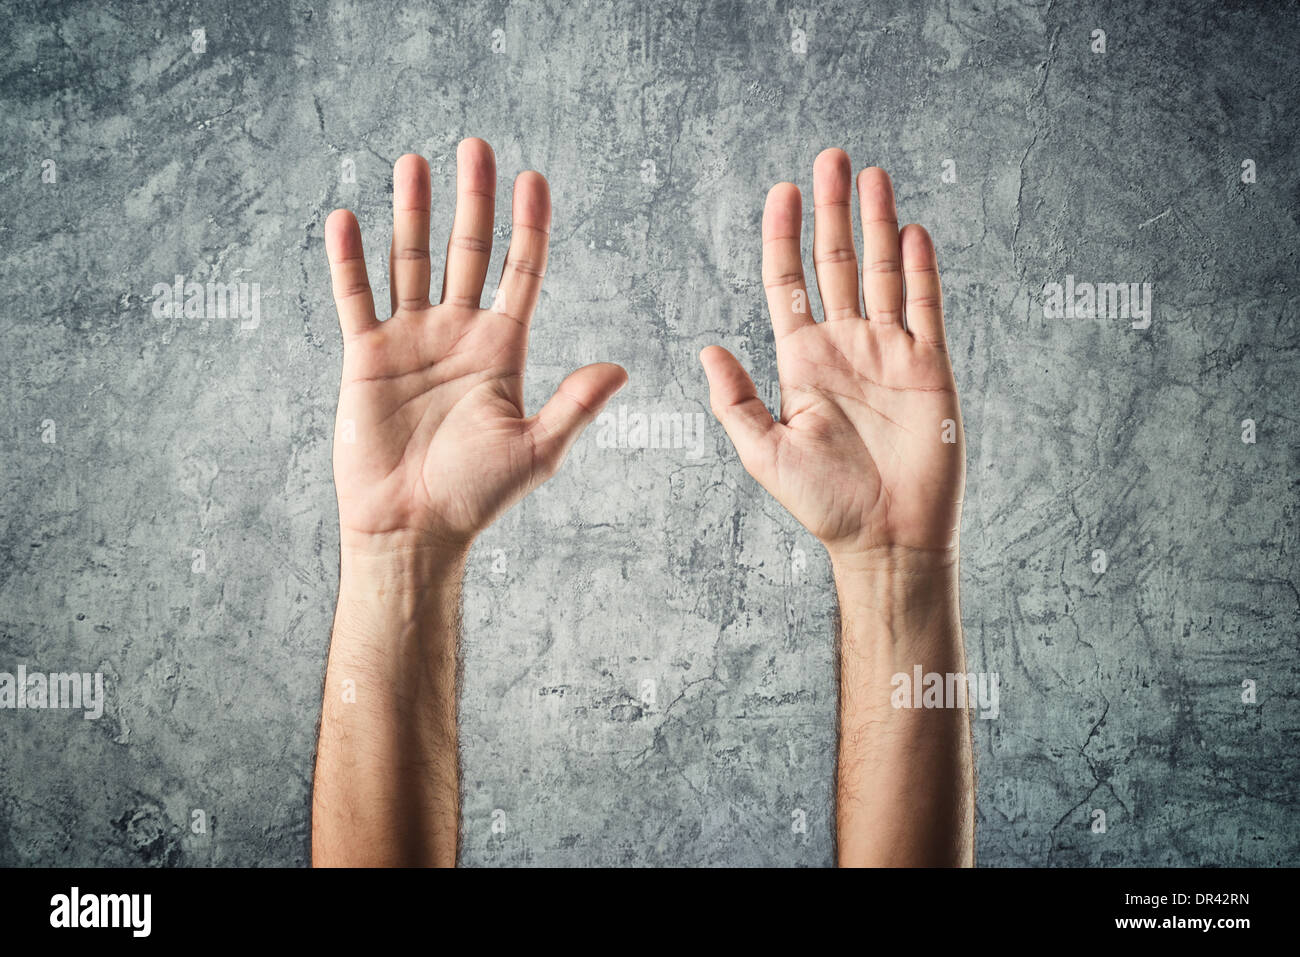 Caucasian male open hands raised as surrender gesture on grunge background Stock Photo